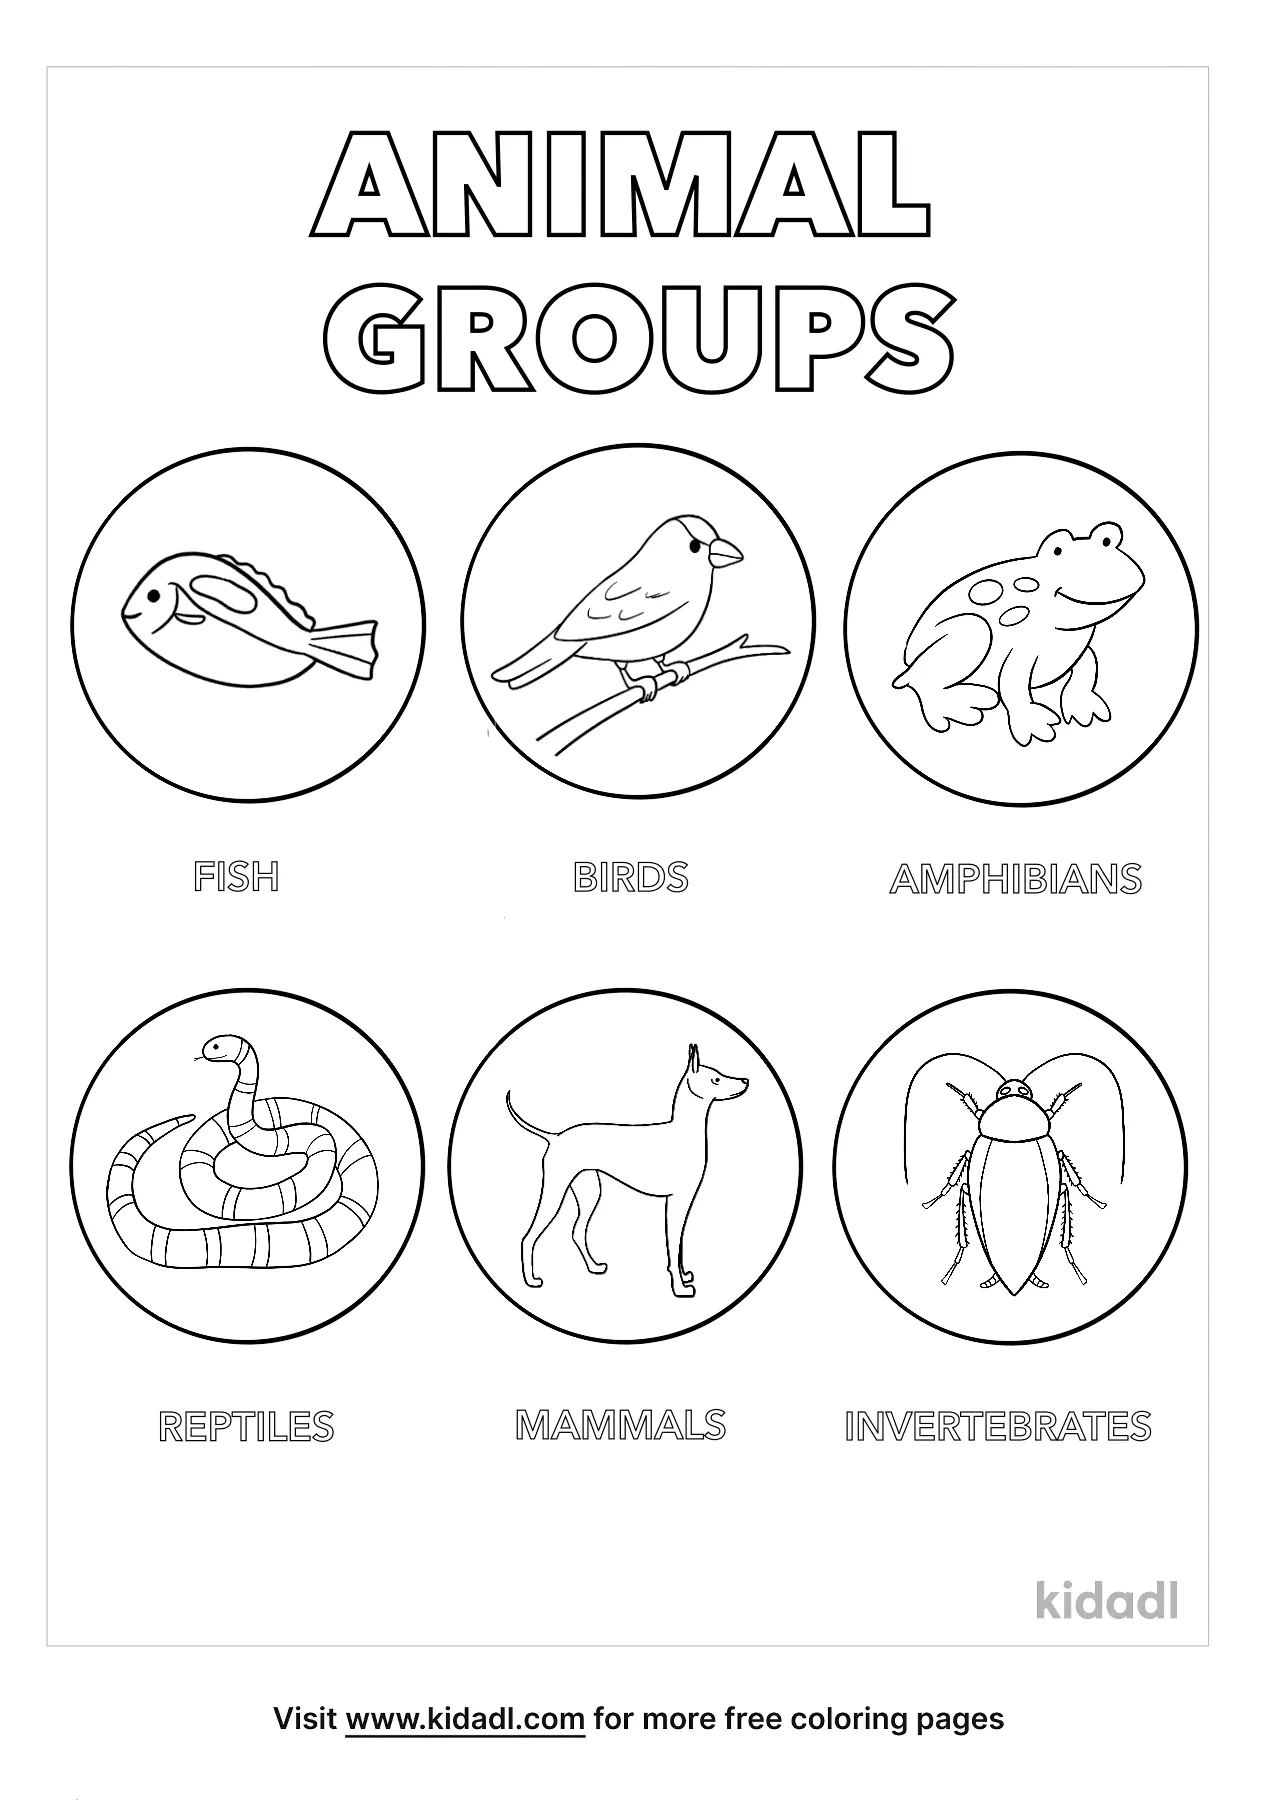 Animal Groups Coloring Page   Free Animals Coloring Page   Kidadl